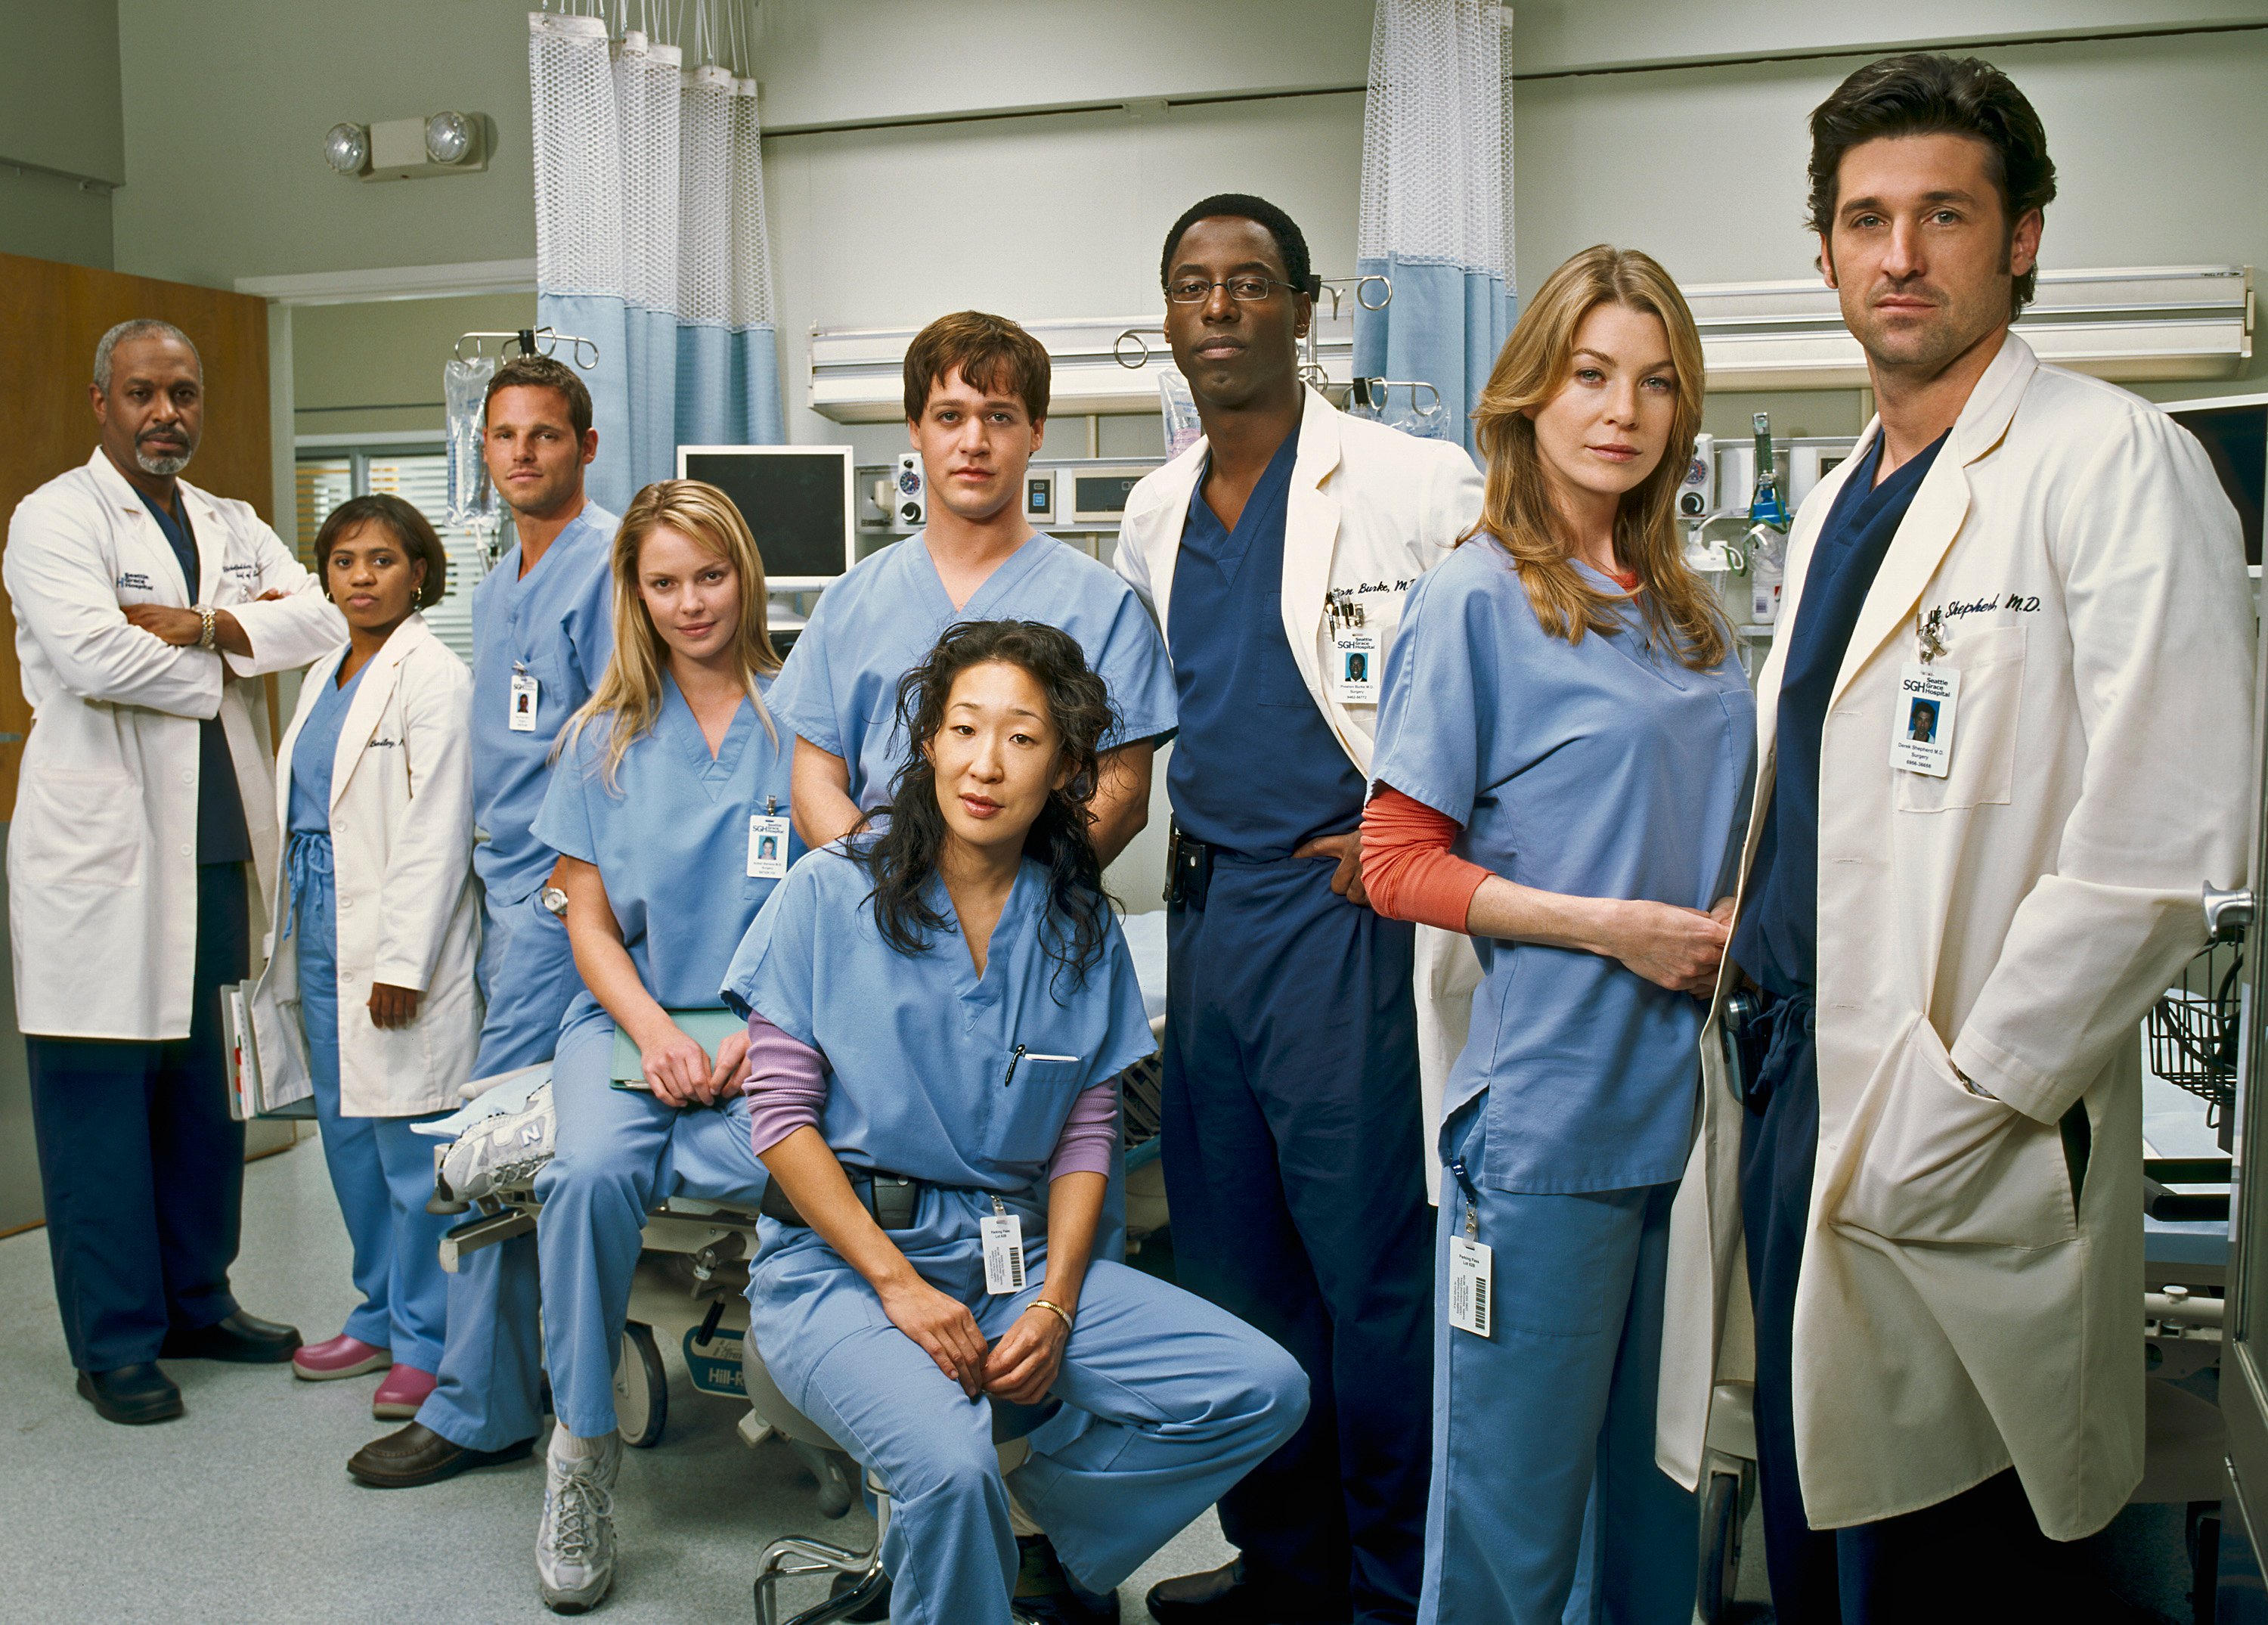 'Grey's Anatomy' cast wearing scrubs and posing for the camera in 2005.